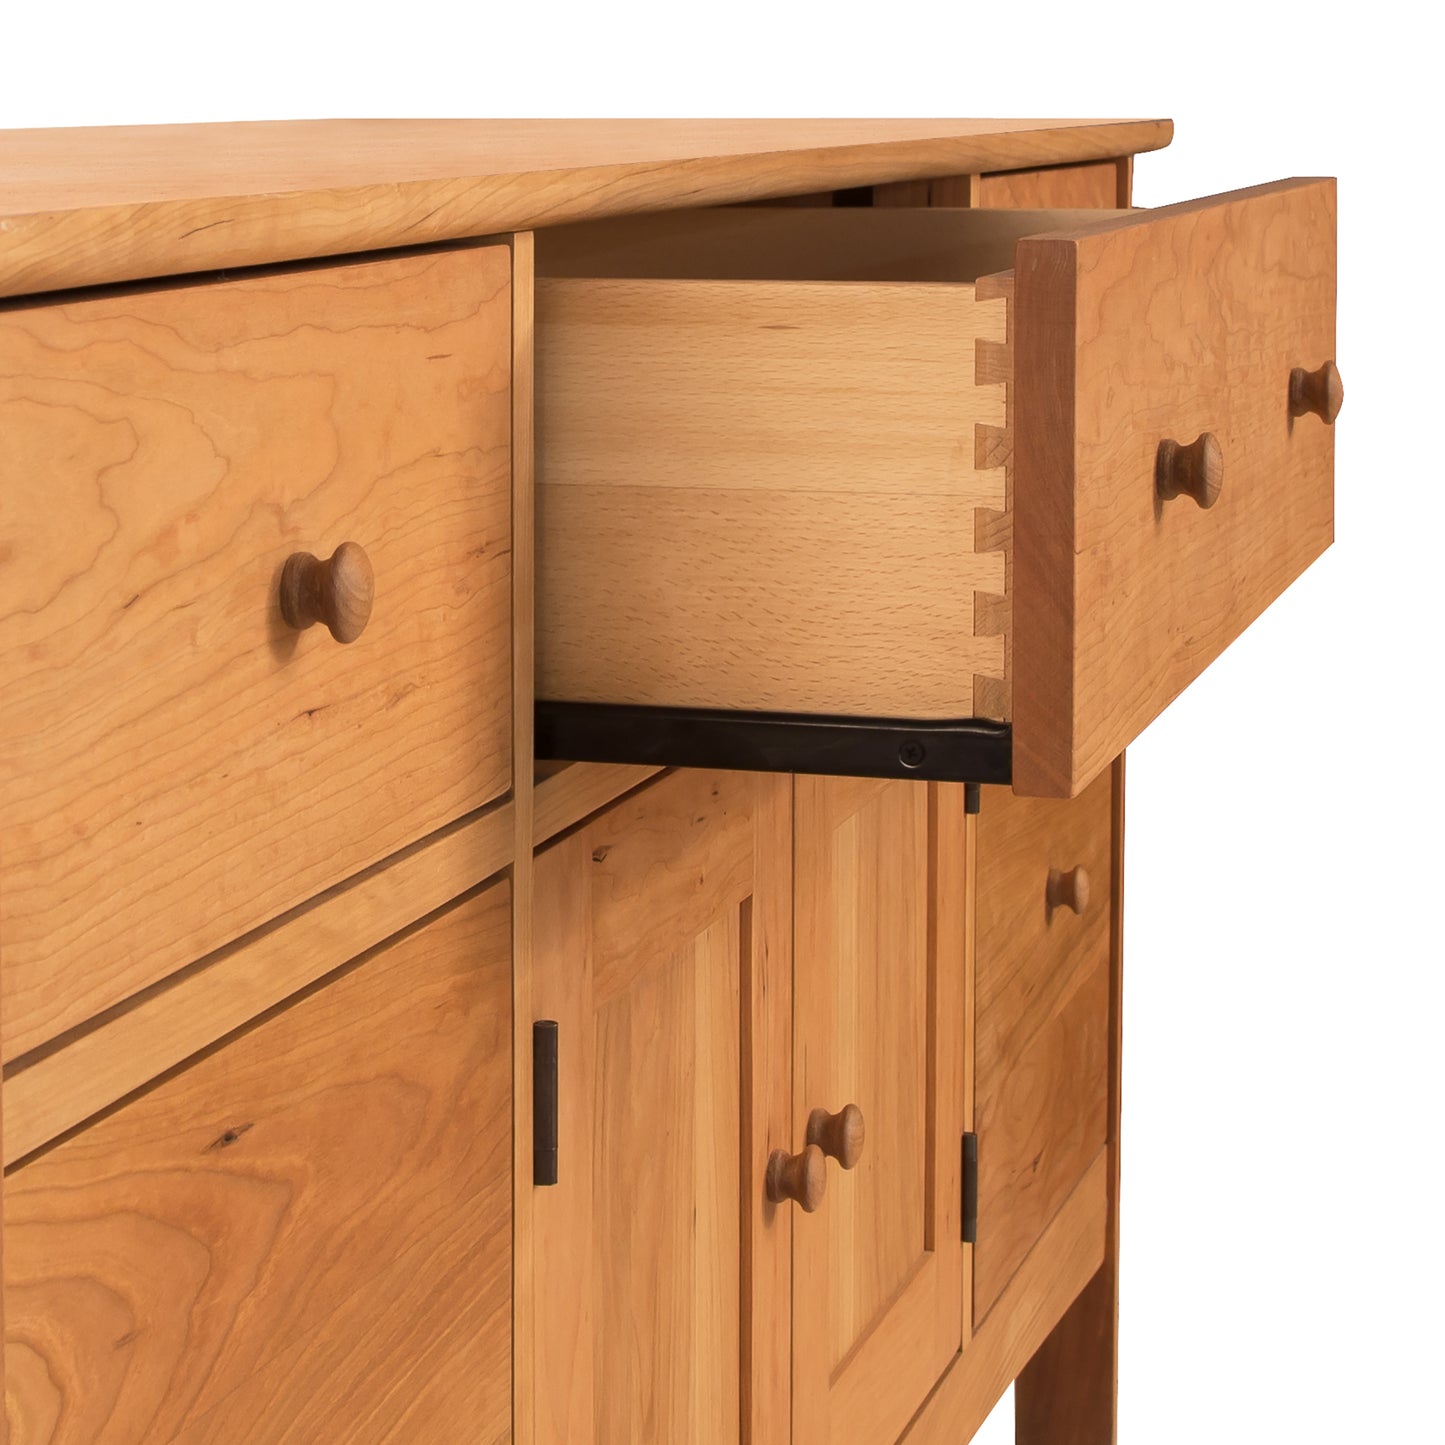 A Heartwood Shaker File Credenza by Vermont Furniture Designs with luxury handmade drawers.